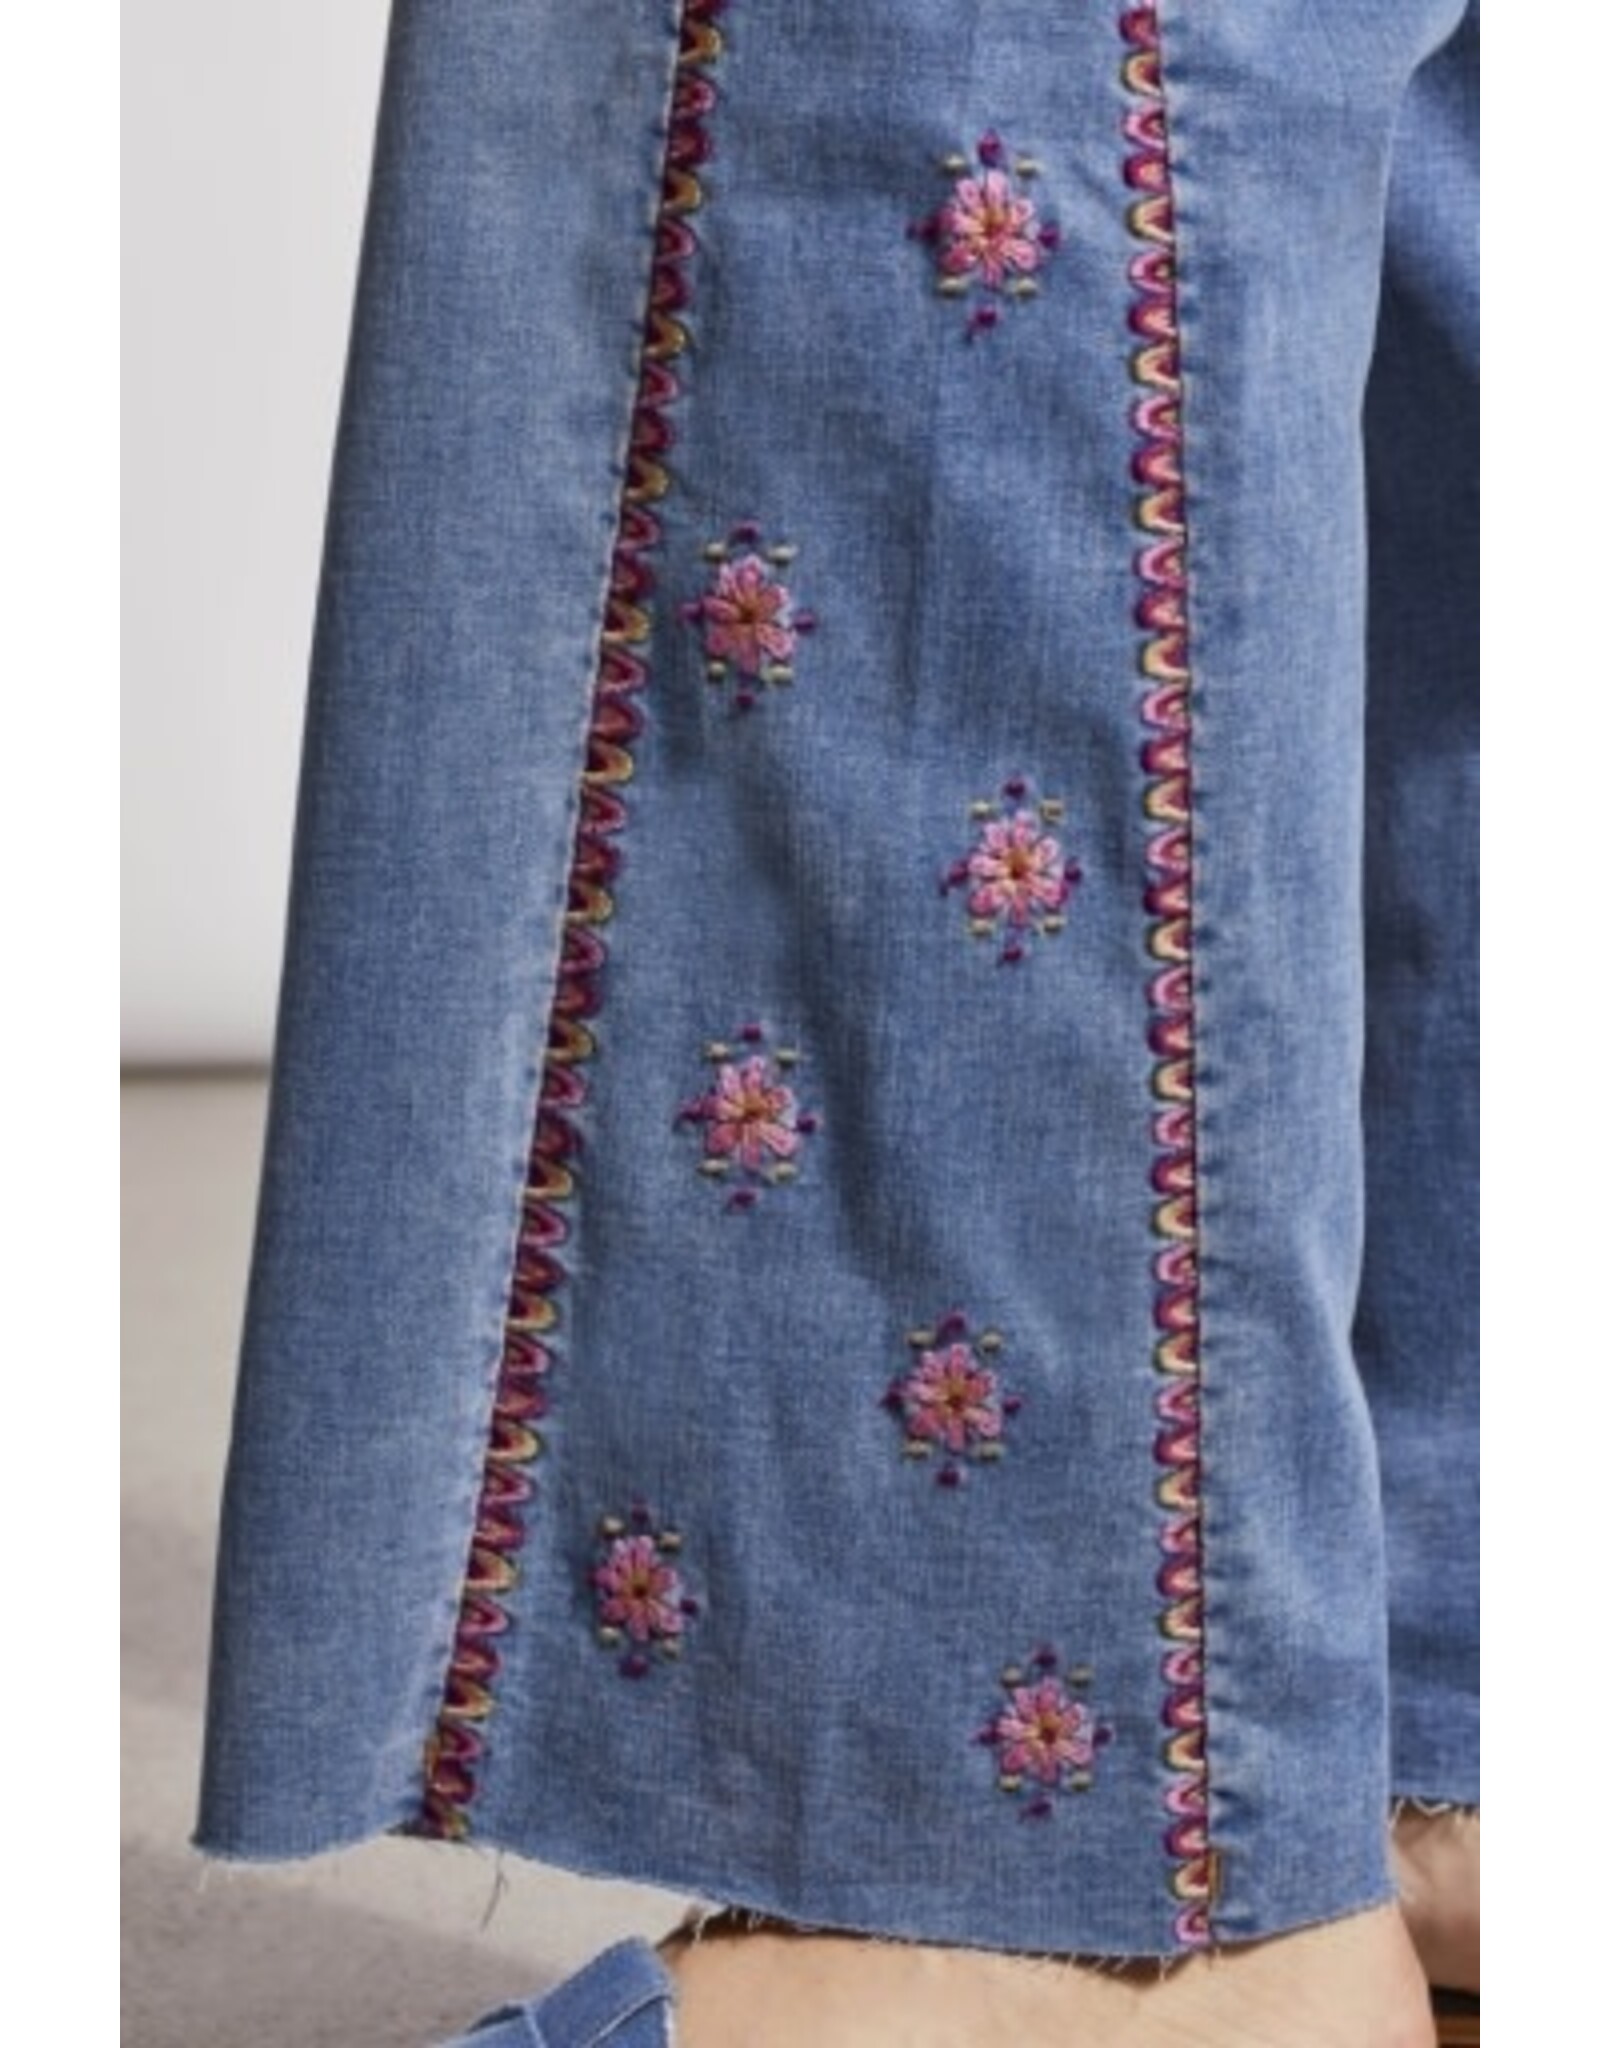 Tribal Tribal Brooke Hugging Jeans with Side Embroidery